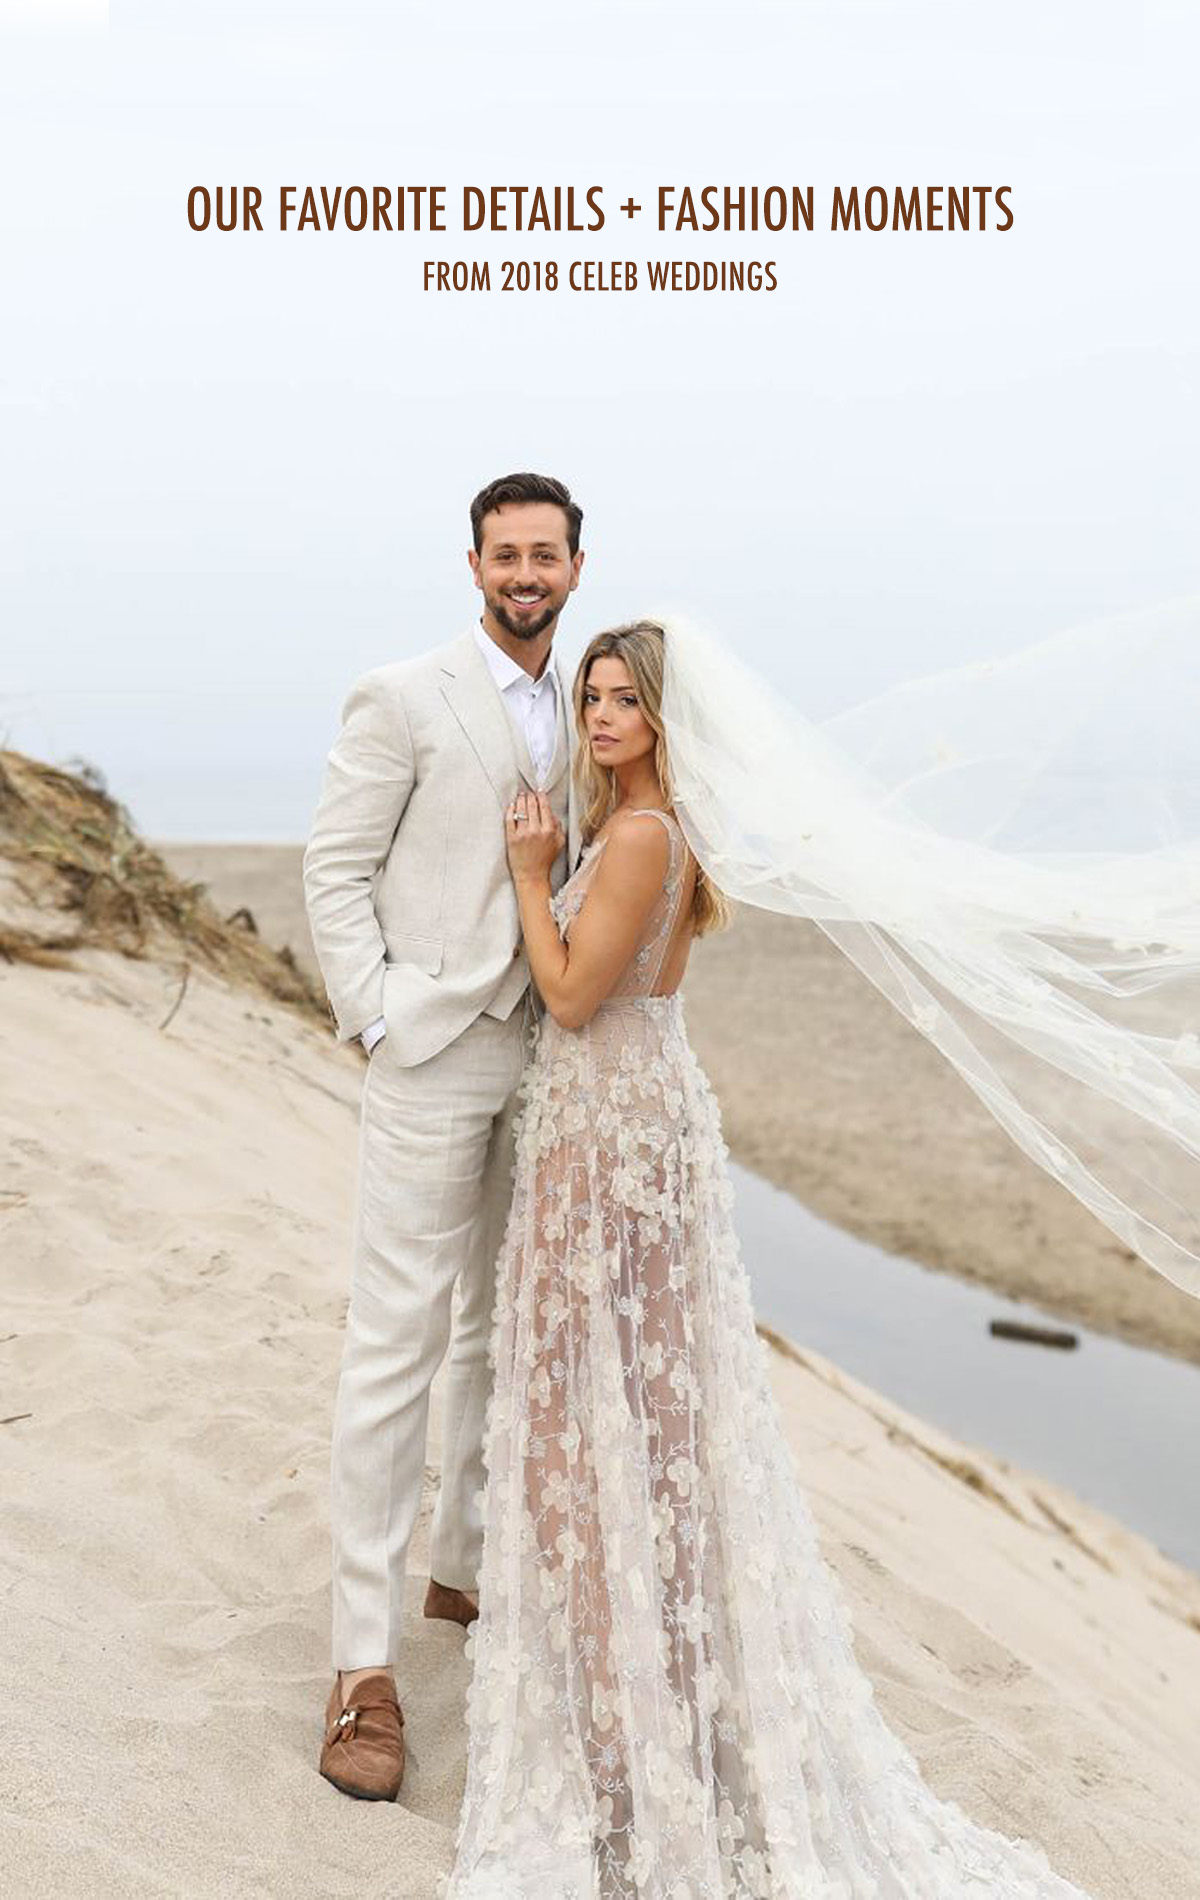 fave details + fashion moments from celeb weddings 2018